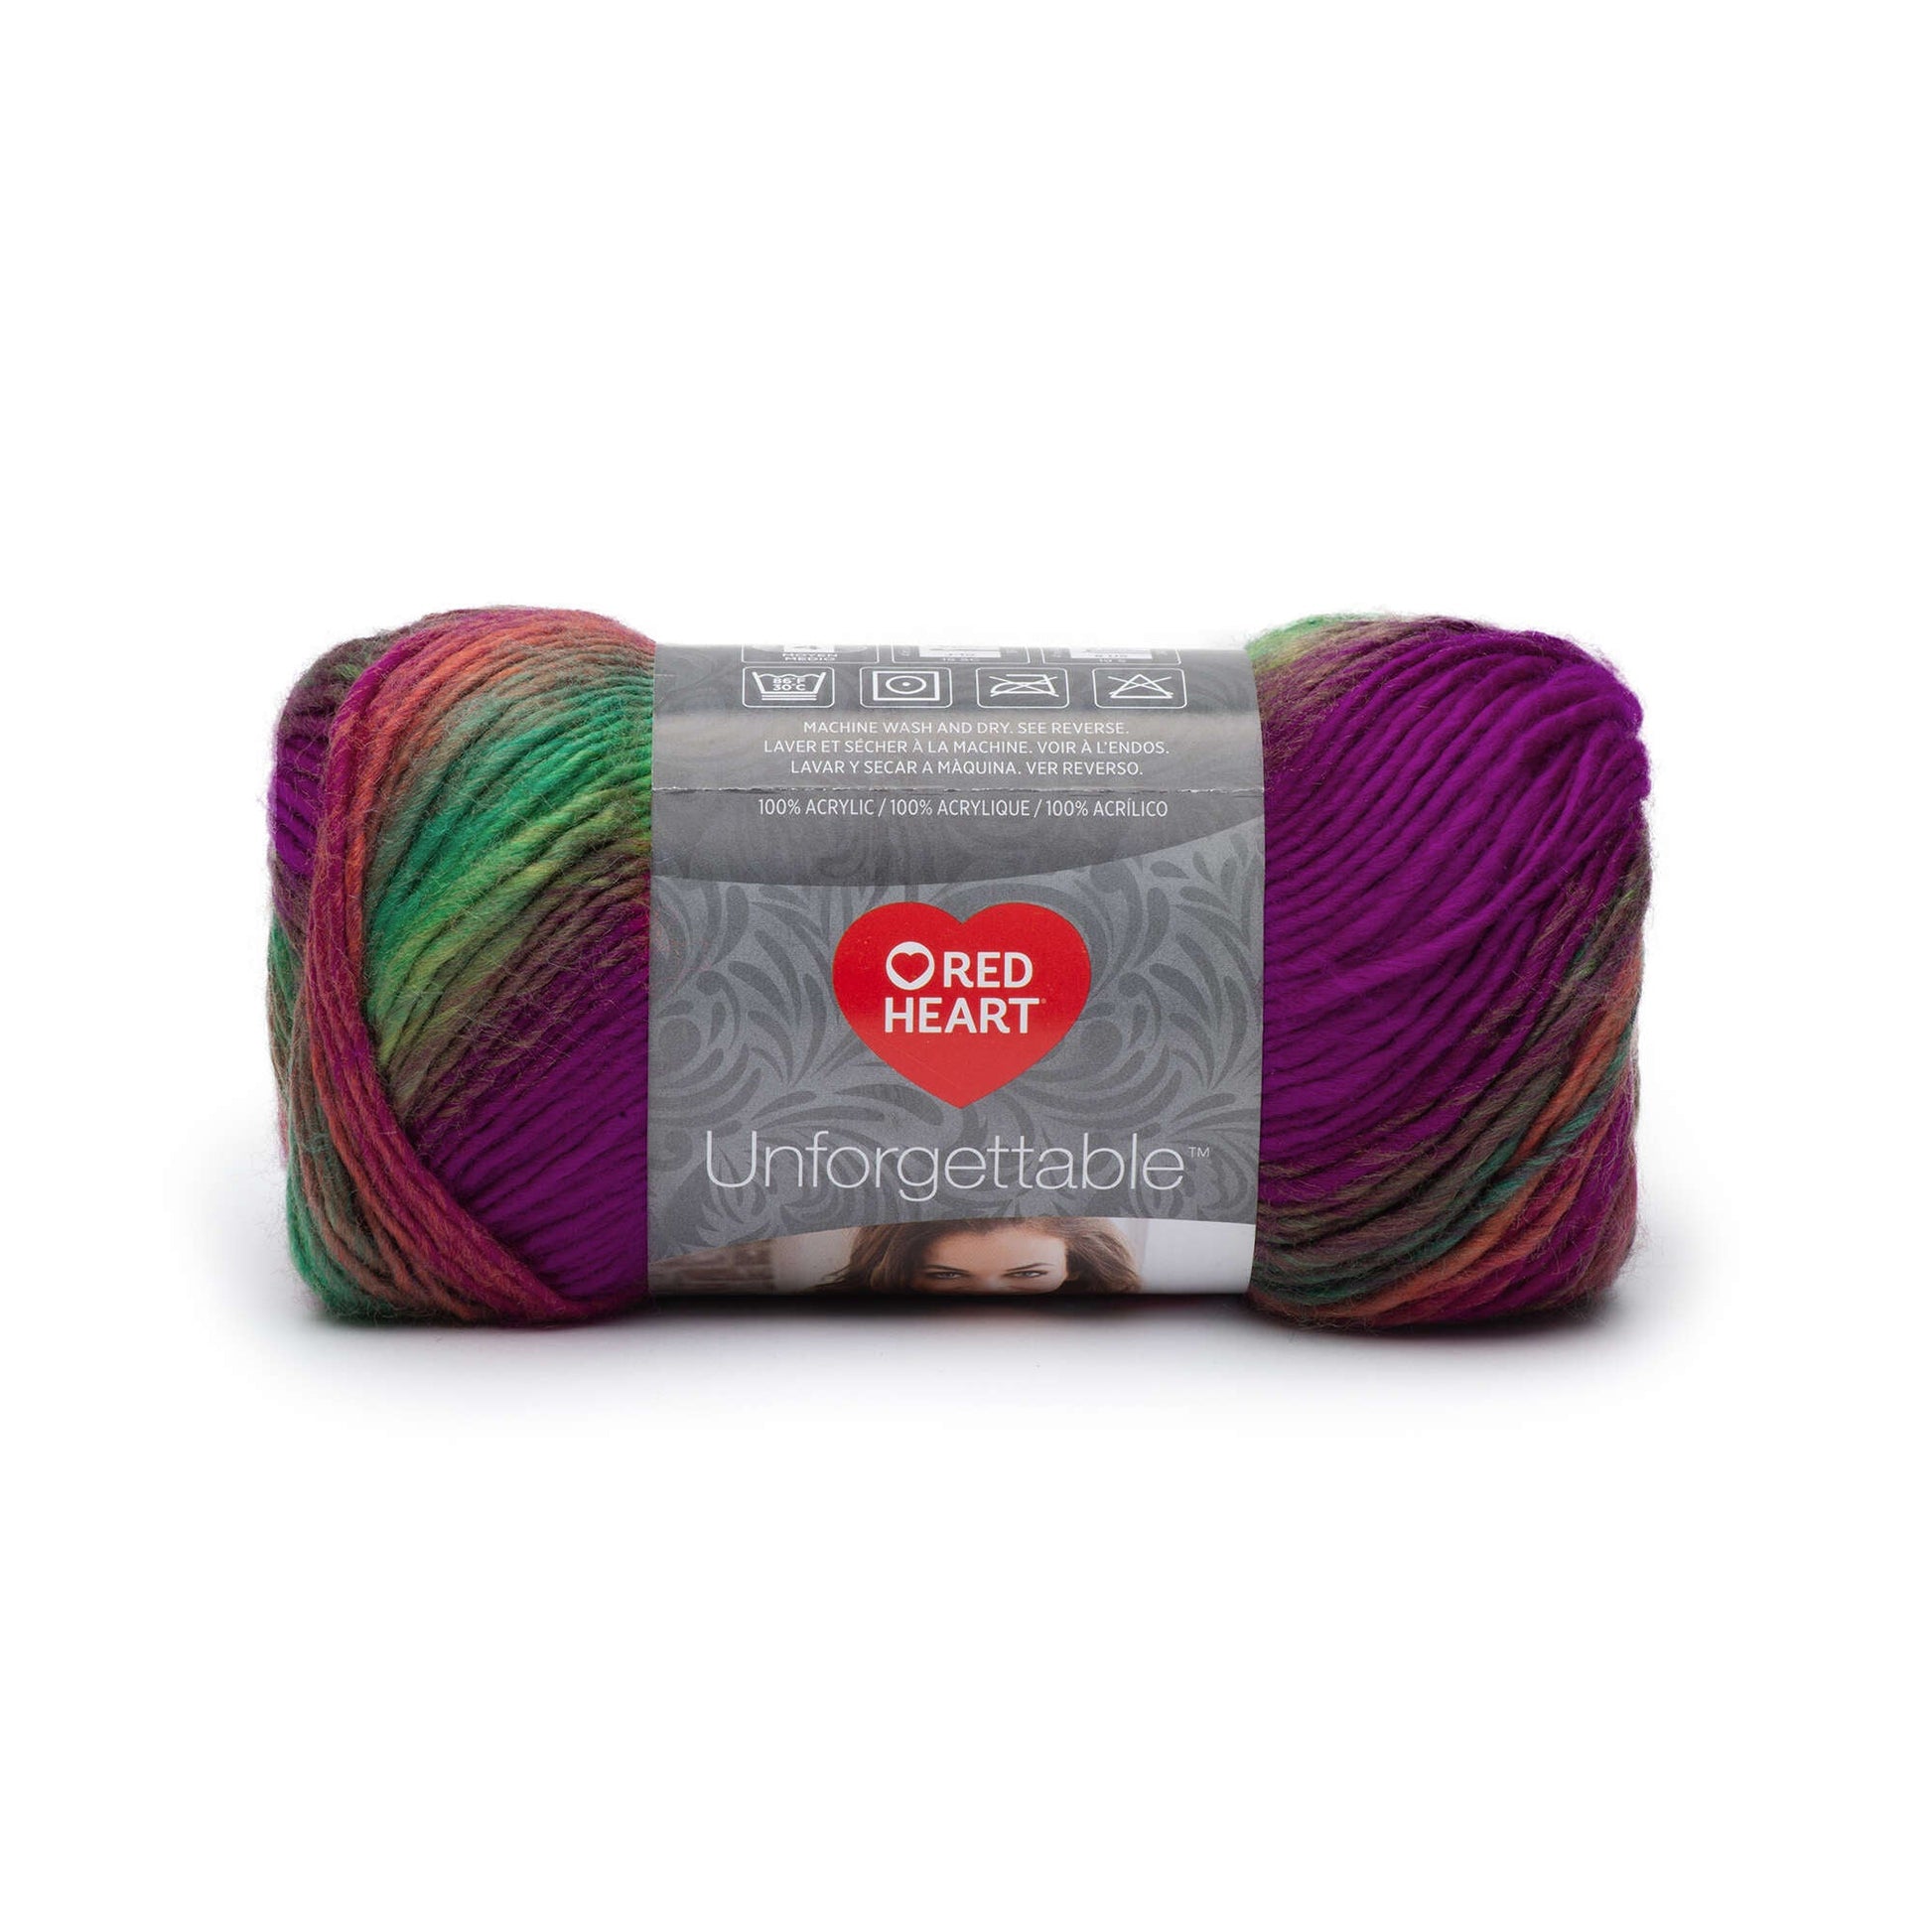 Red Heart Unforgettable Yarn - Clearance Shades* Rainforest